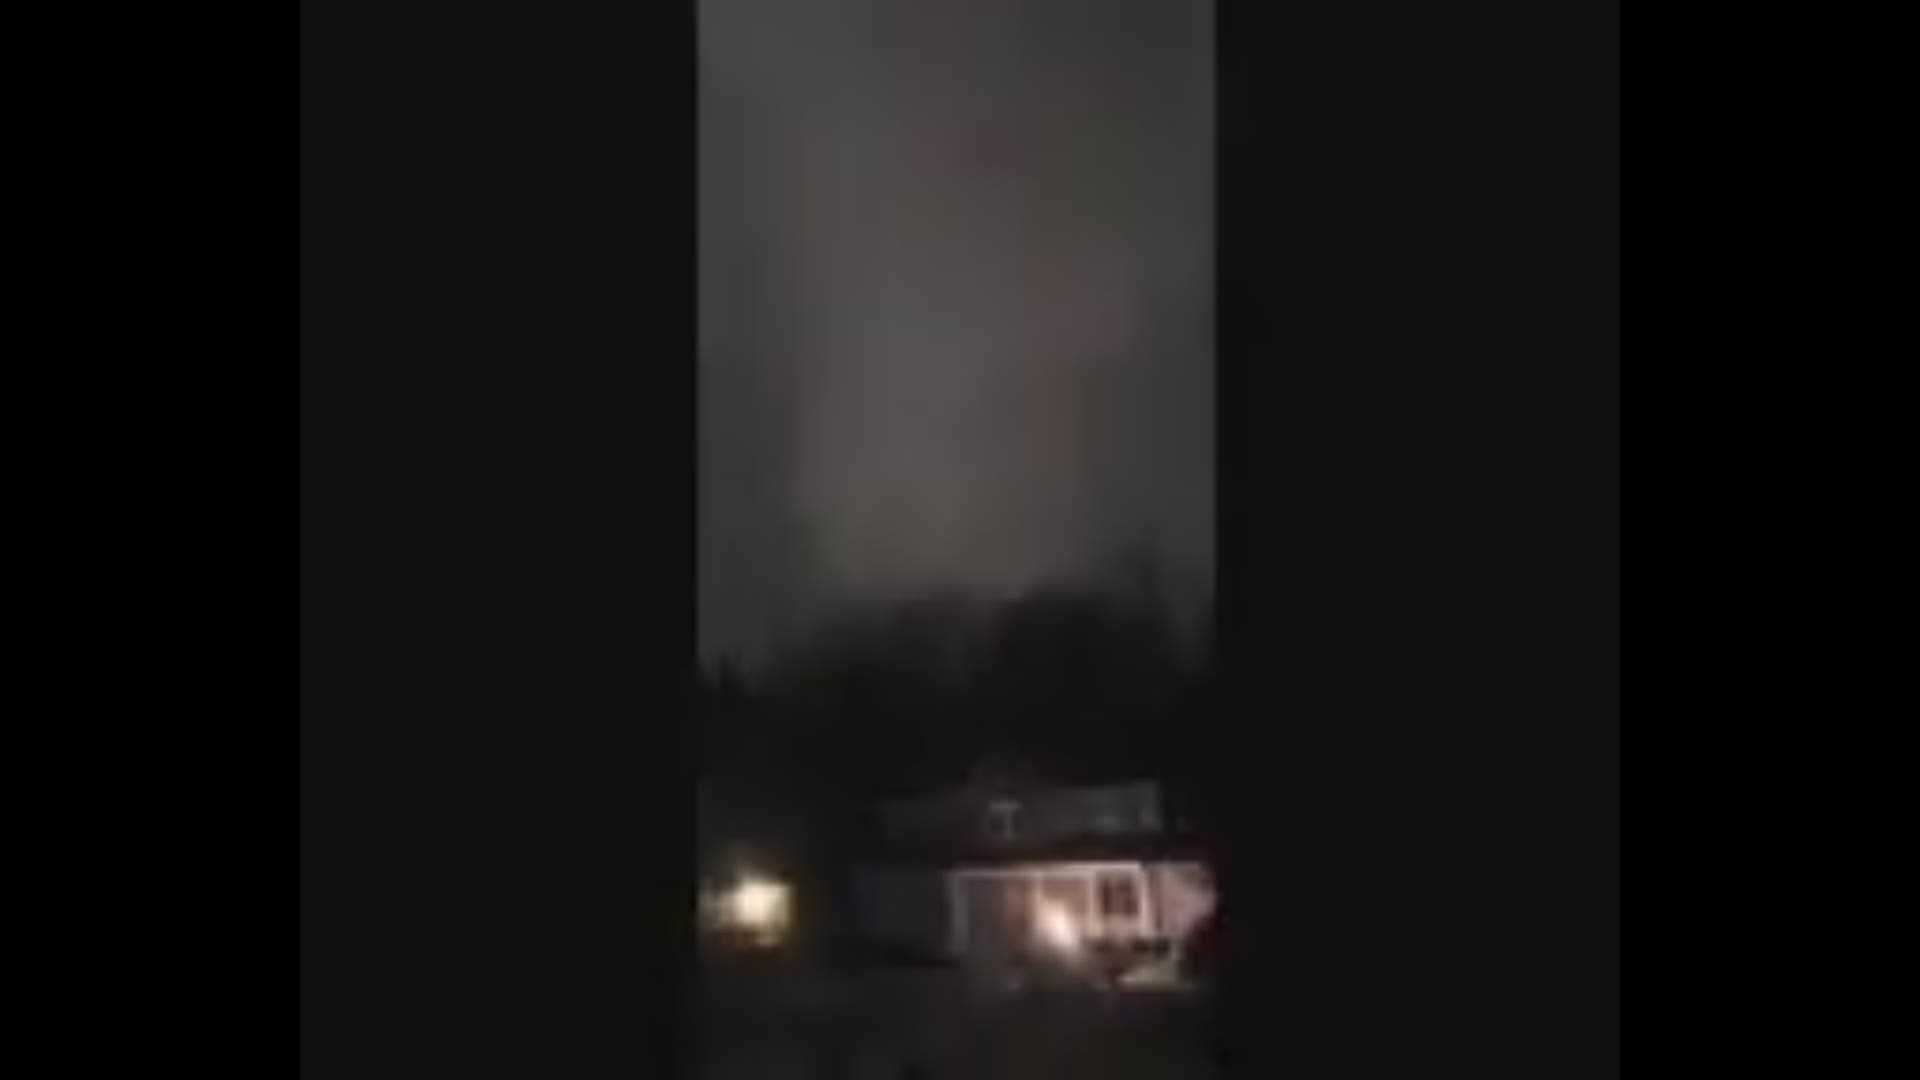 Storms have left tens of thousands without power in Northeast Ohio. Susan Russano and Jared Svodoba provided this video to 3News.